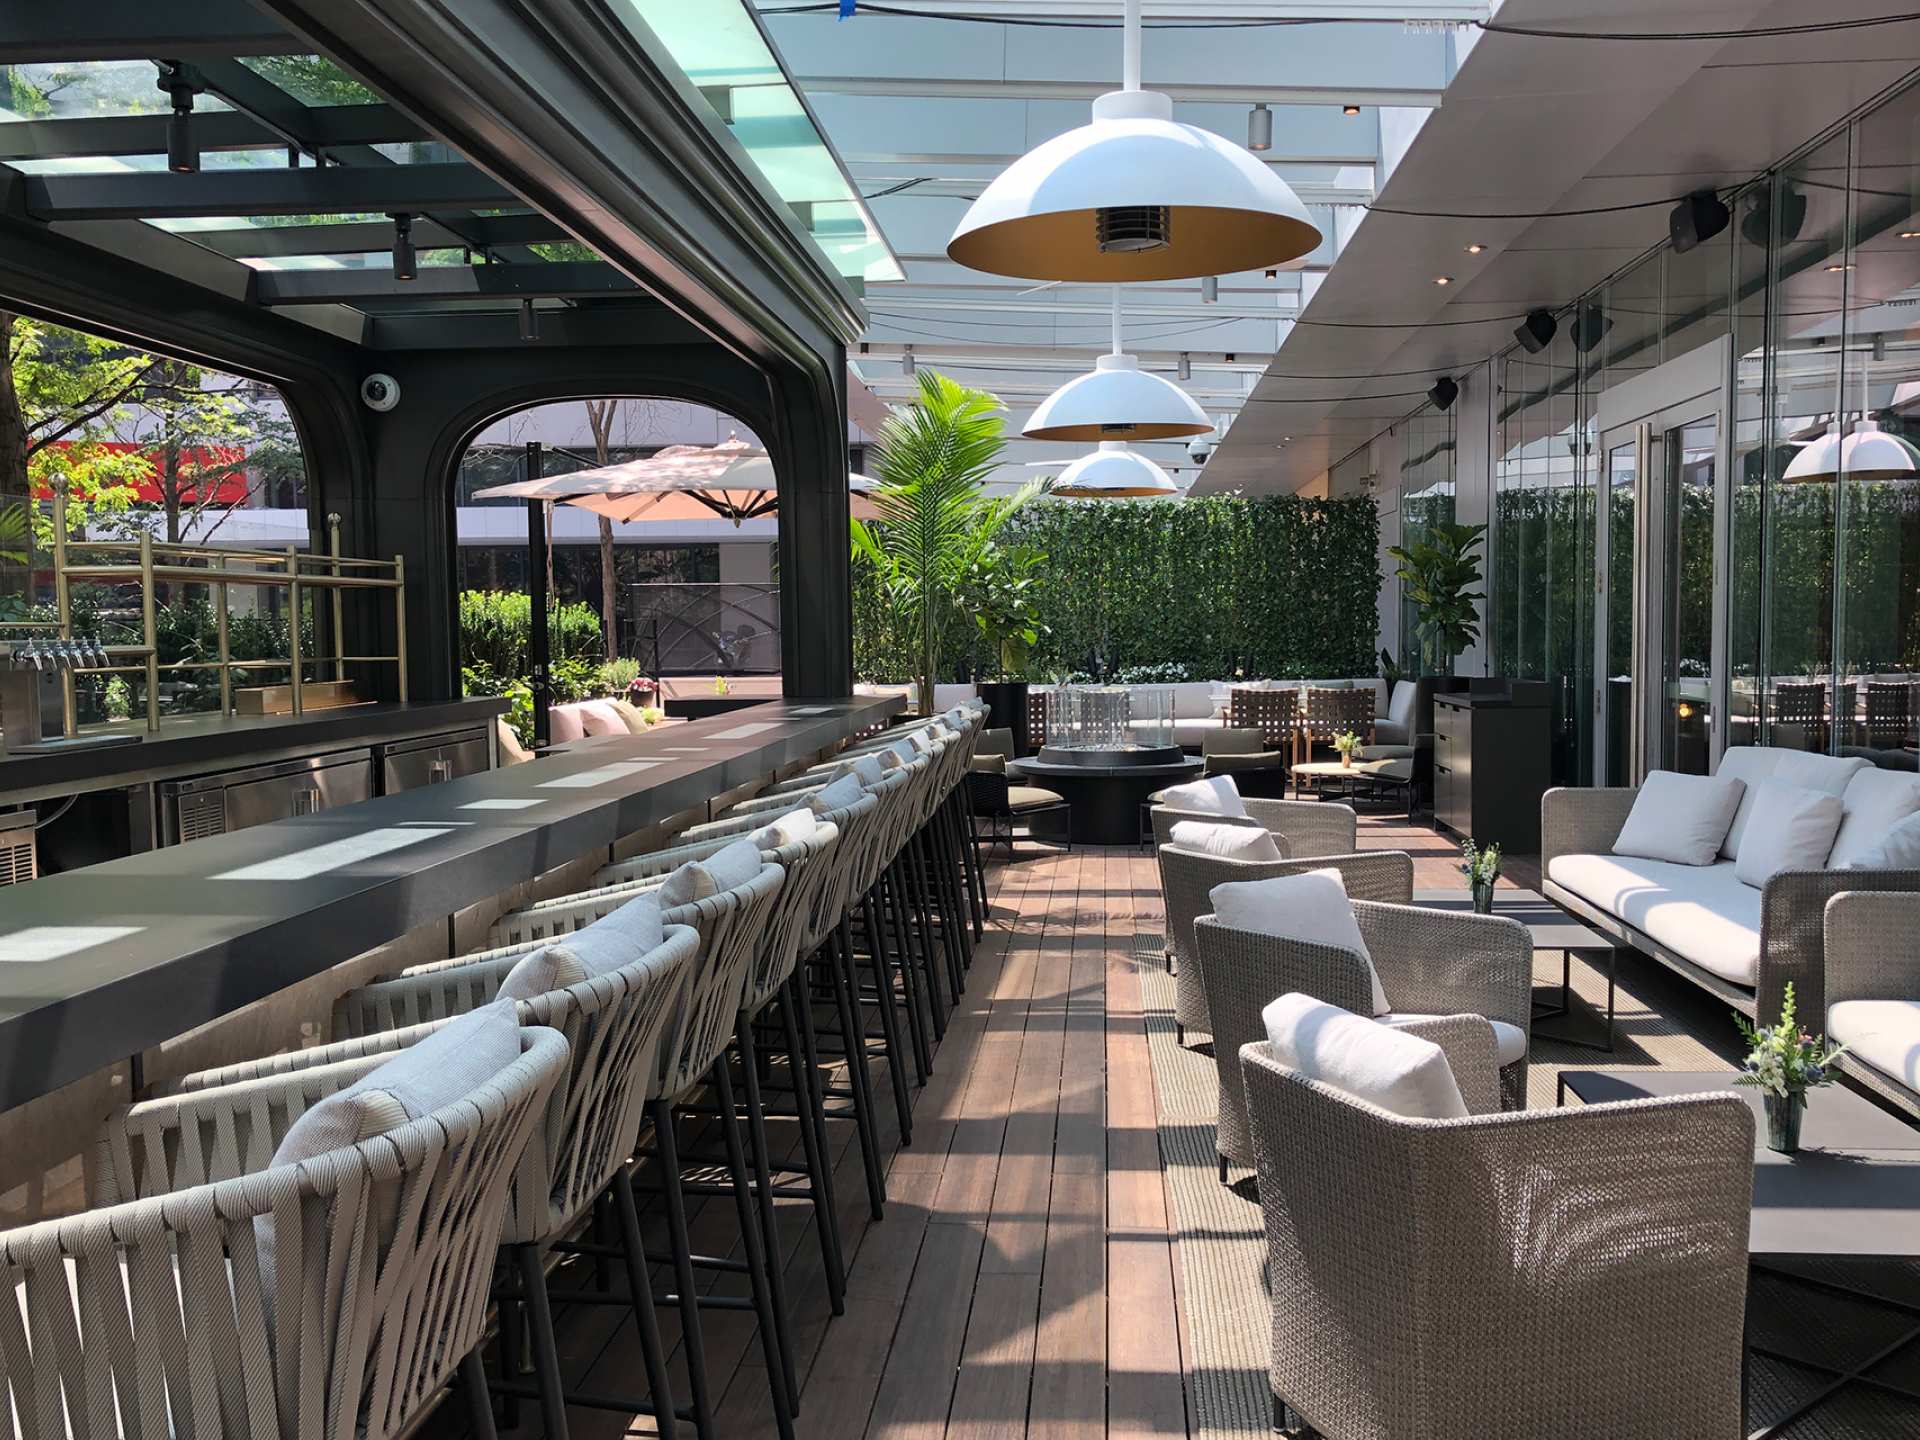 Best patios in Toronto | The bar and seating on the patio at EPOCH Bar & Kitchen Terrace